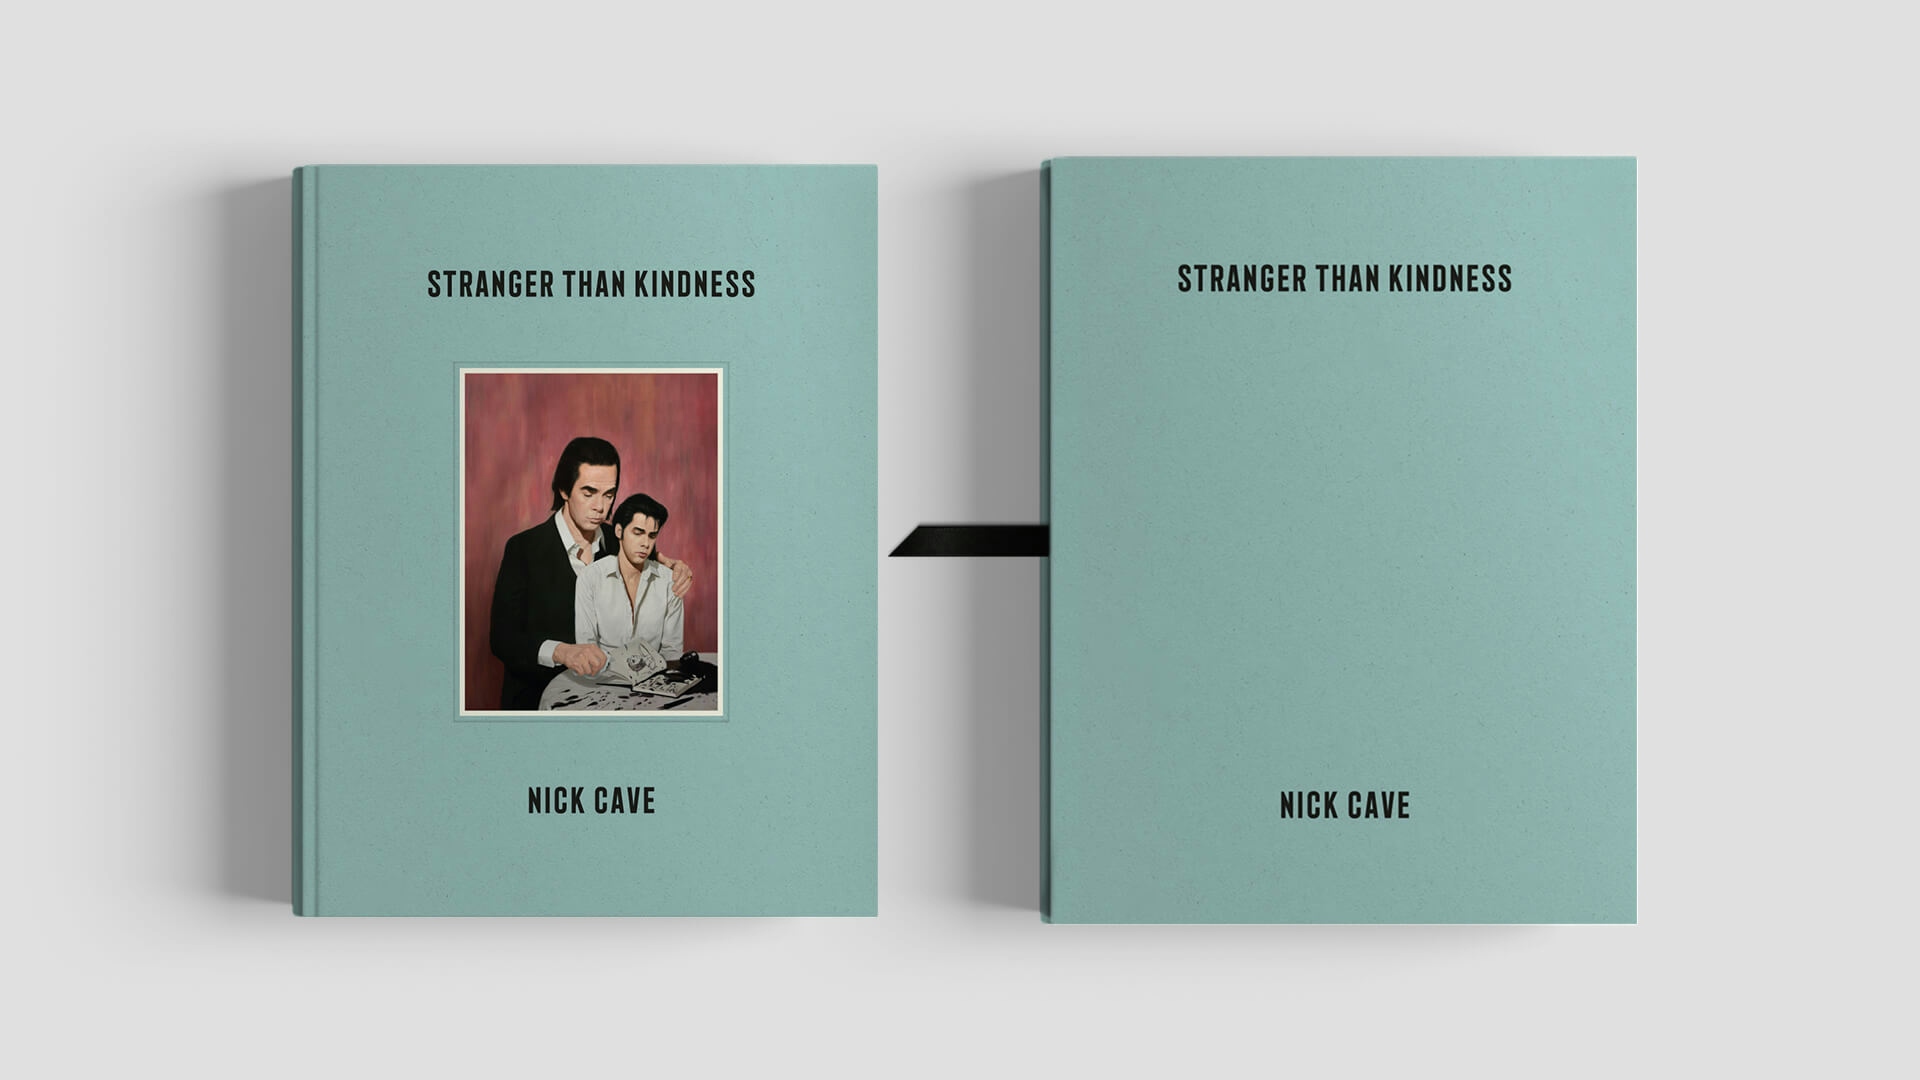 NICK CAVE: STRANGER THAN KINDNESS Book Cover